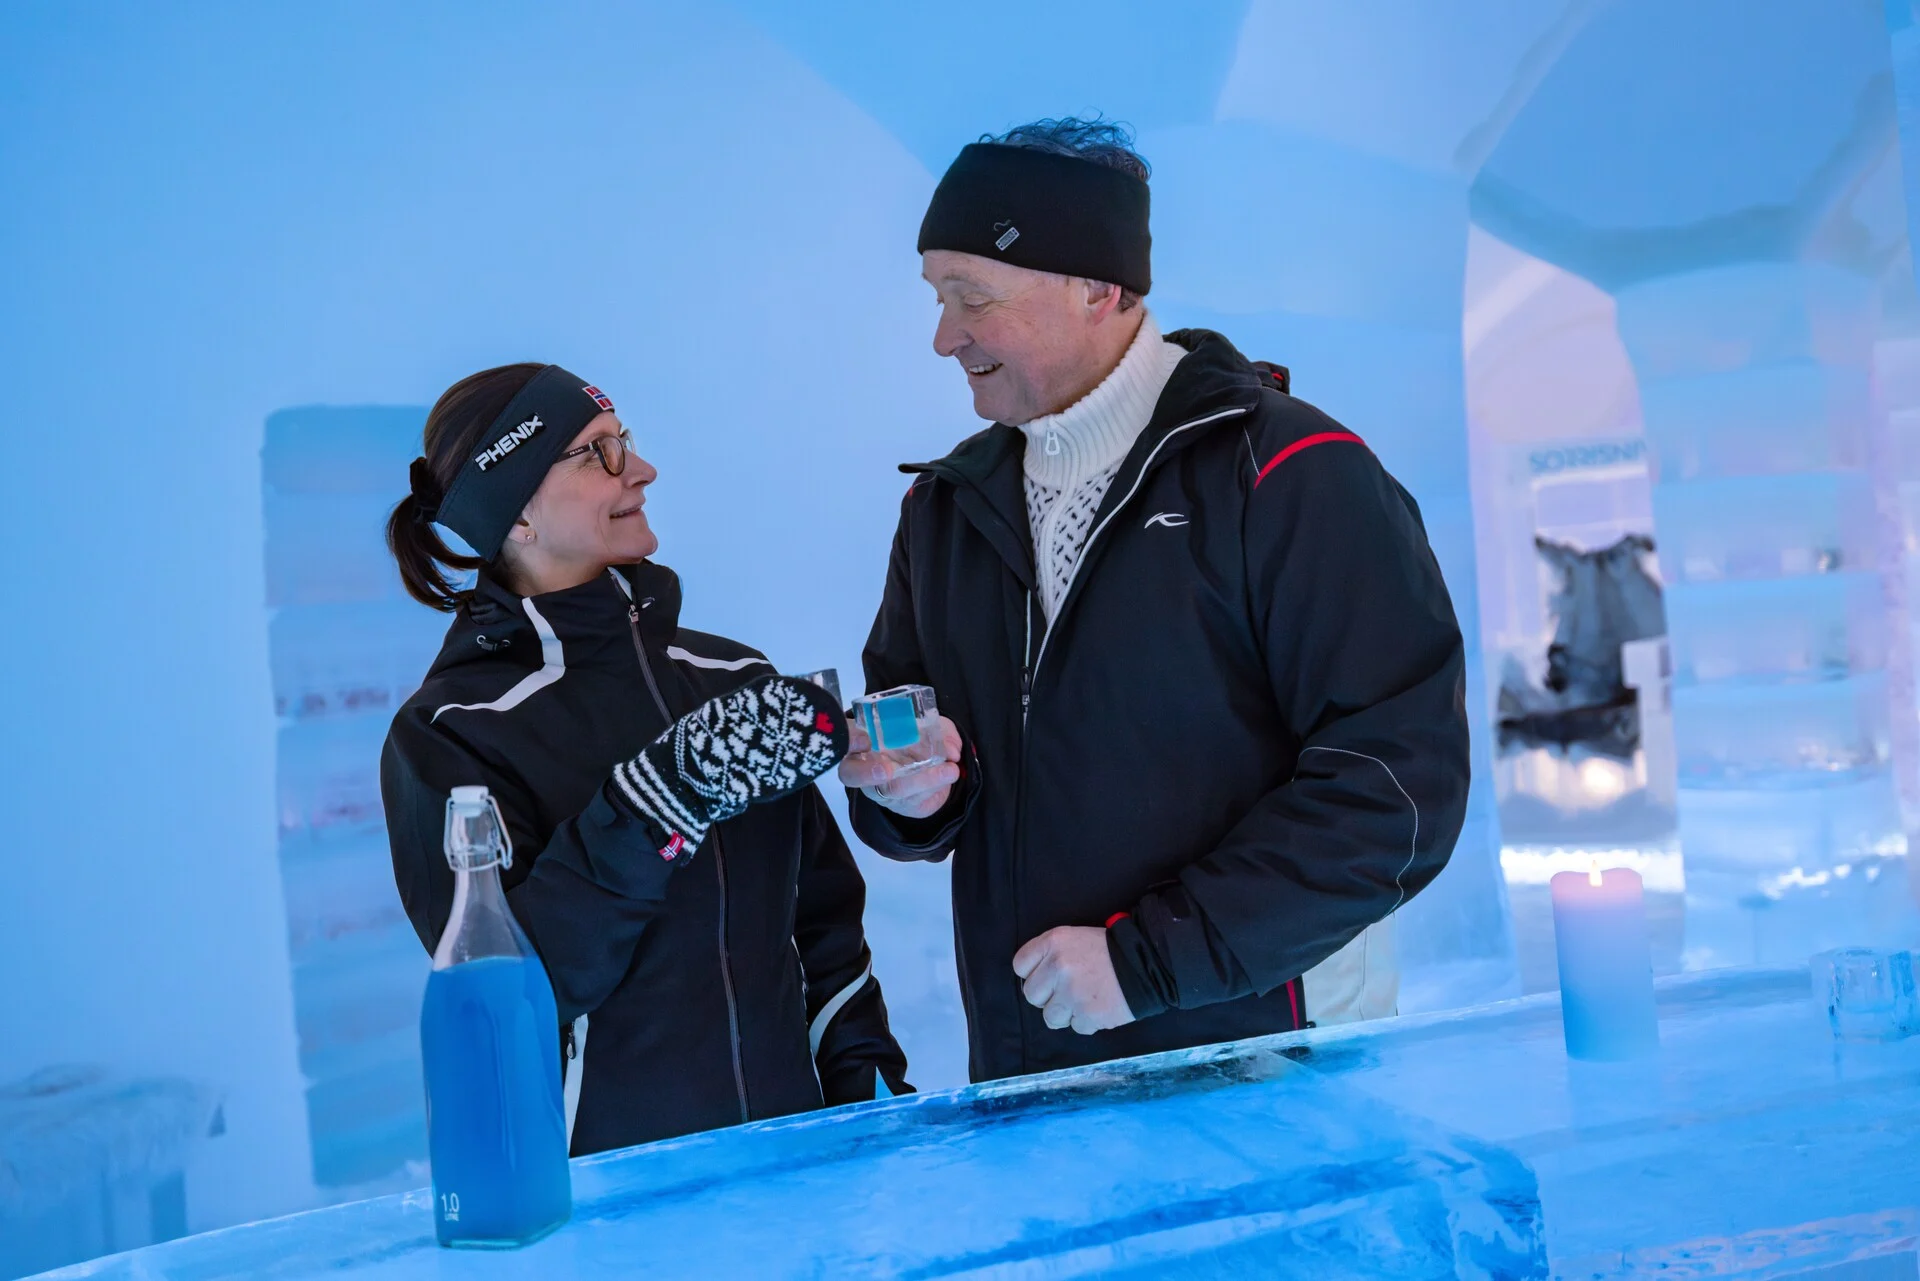 A couple enjoying a drink at the Sorrisniva Ice Hotel, Norway